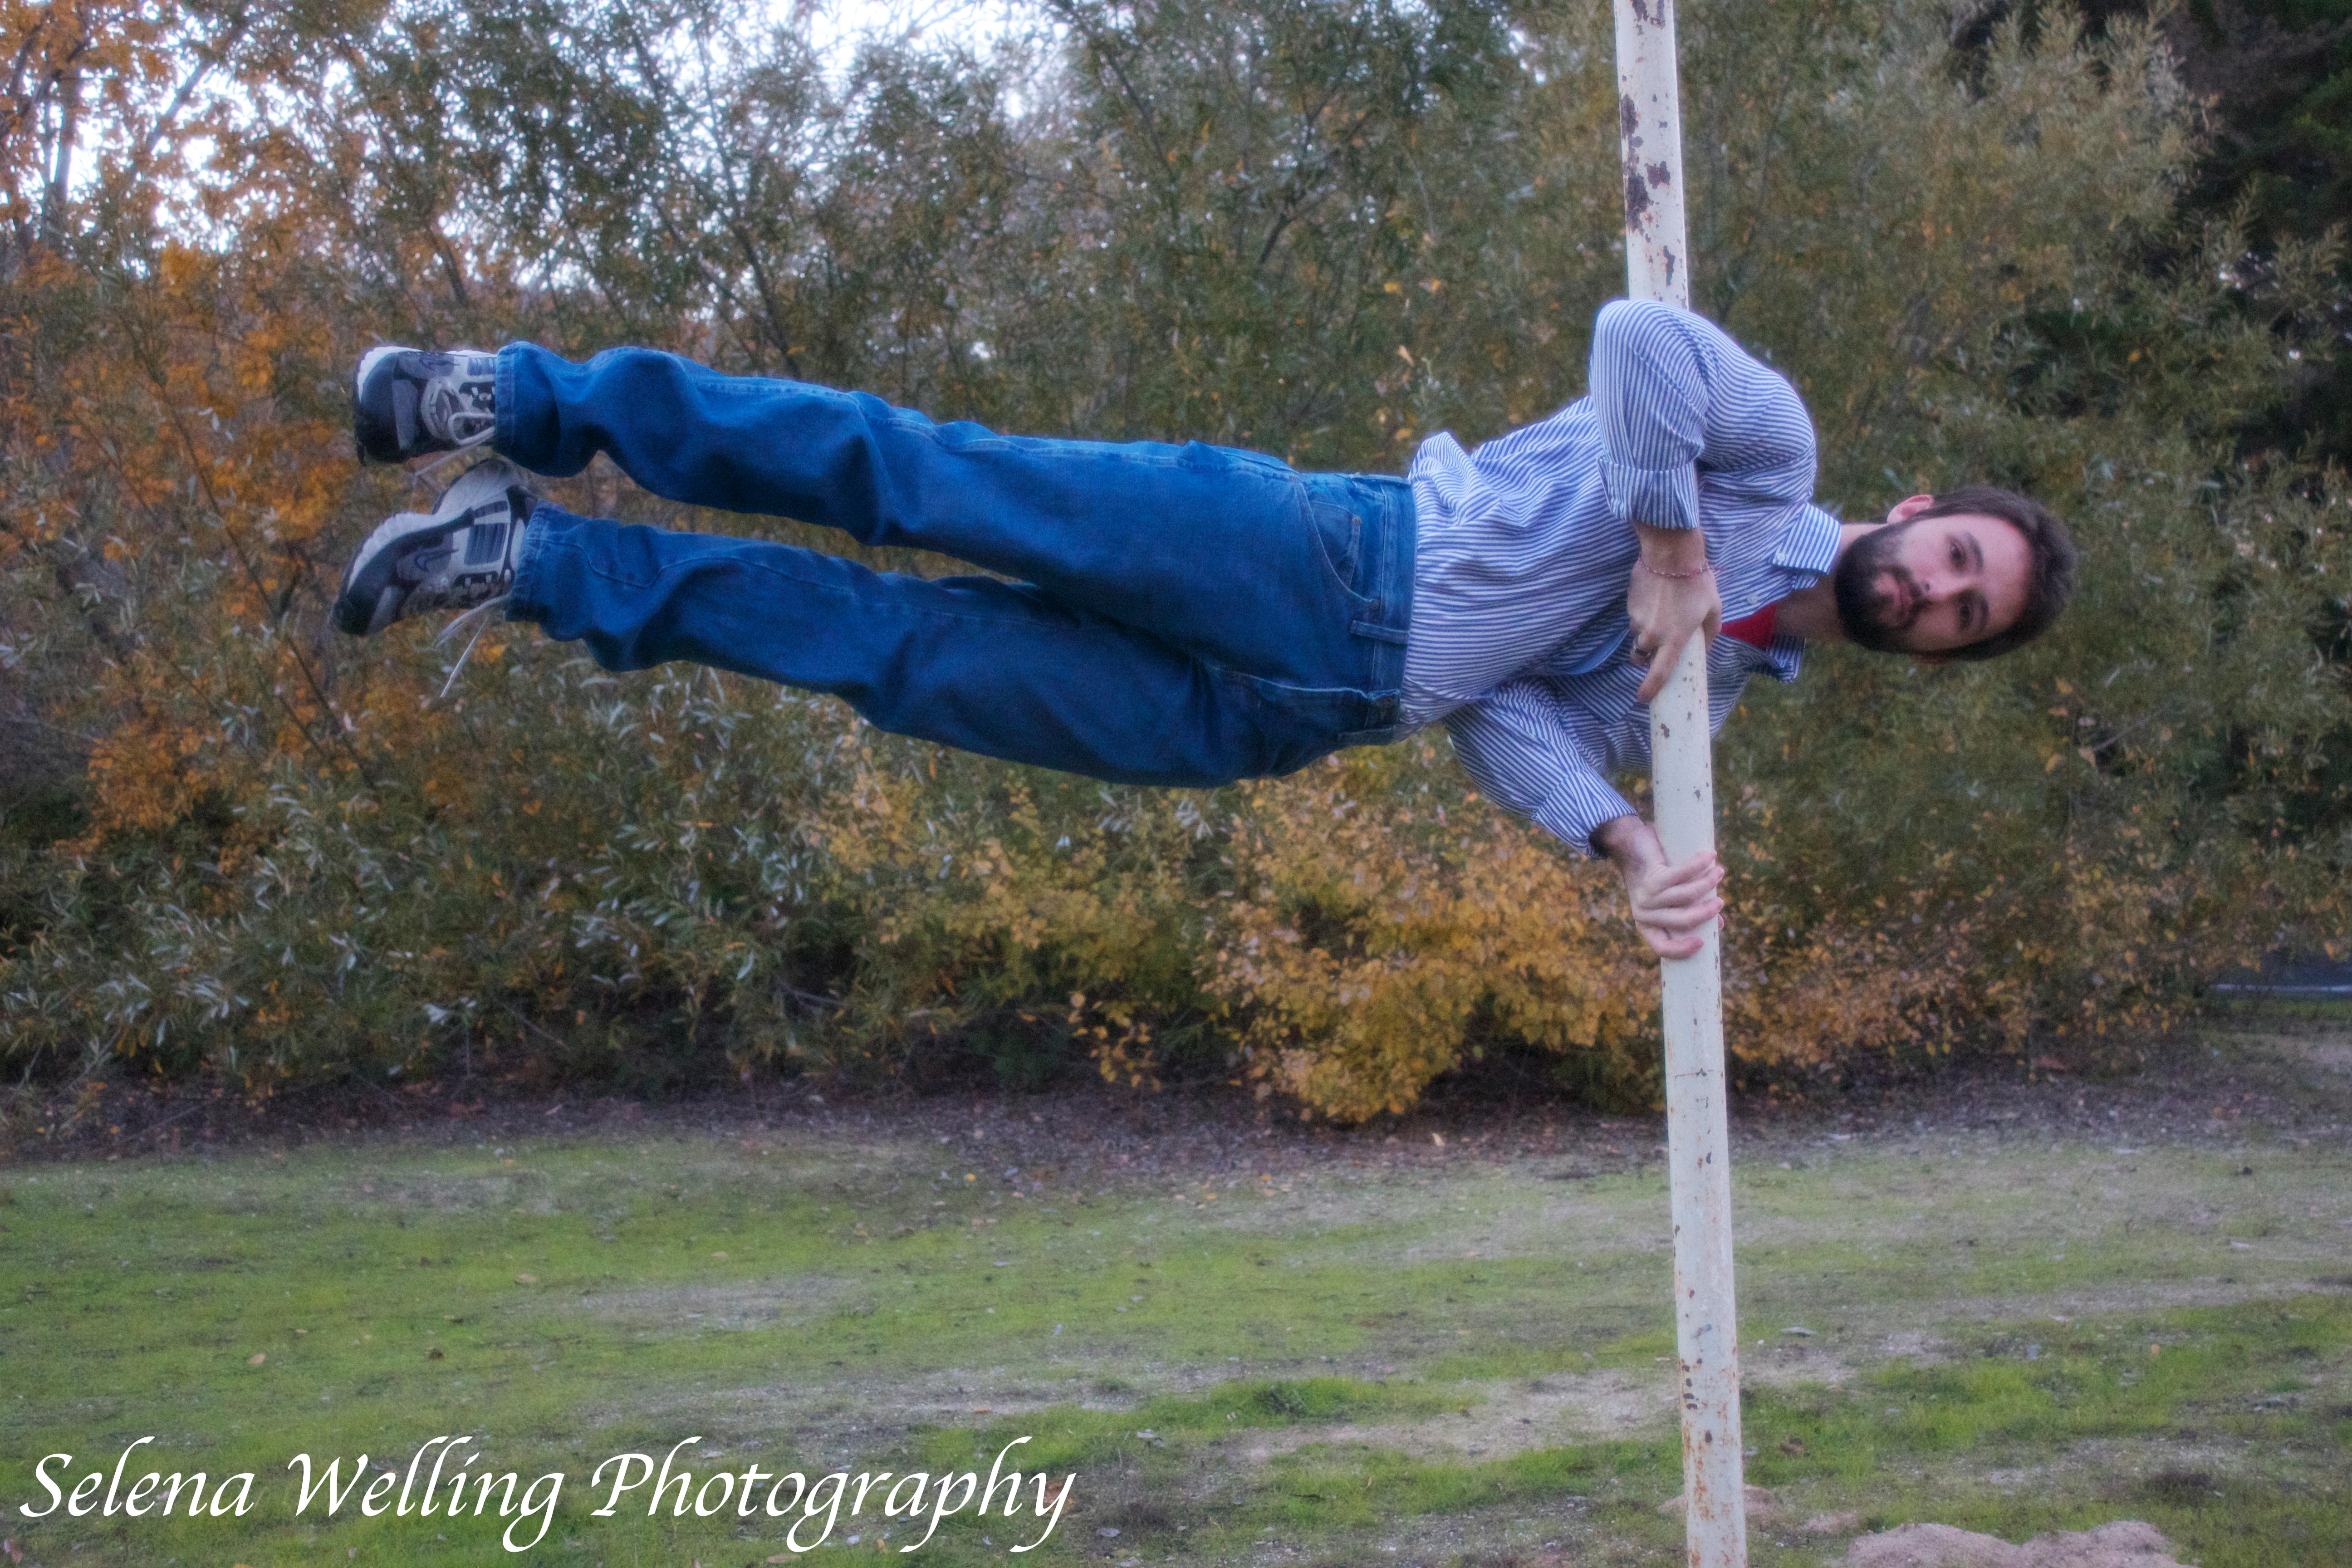 A bit of stunt work for the camera after several years of martial arts and gymnastics.